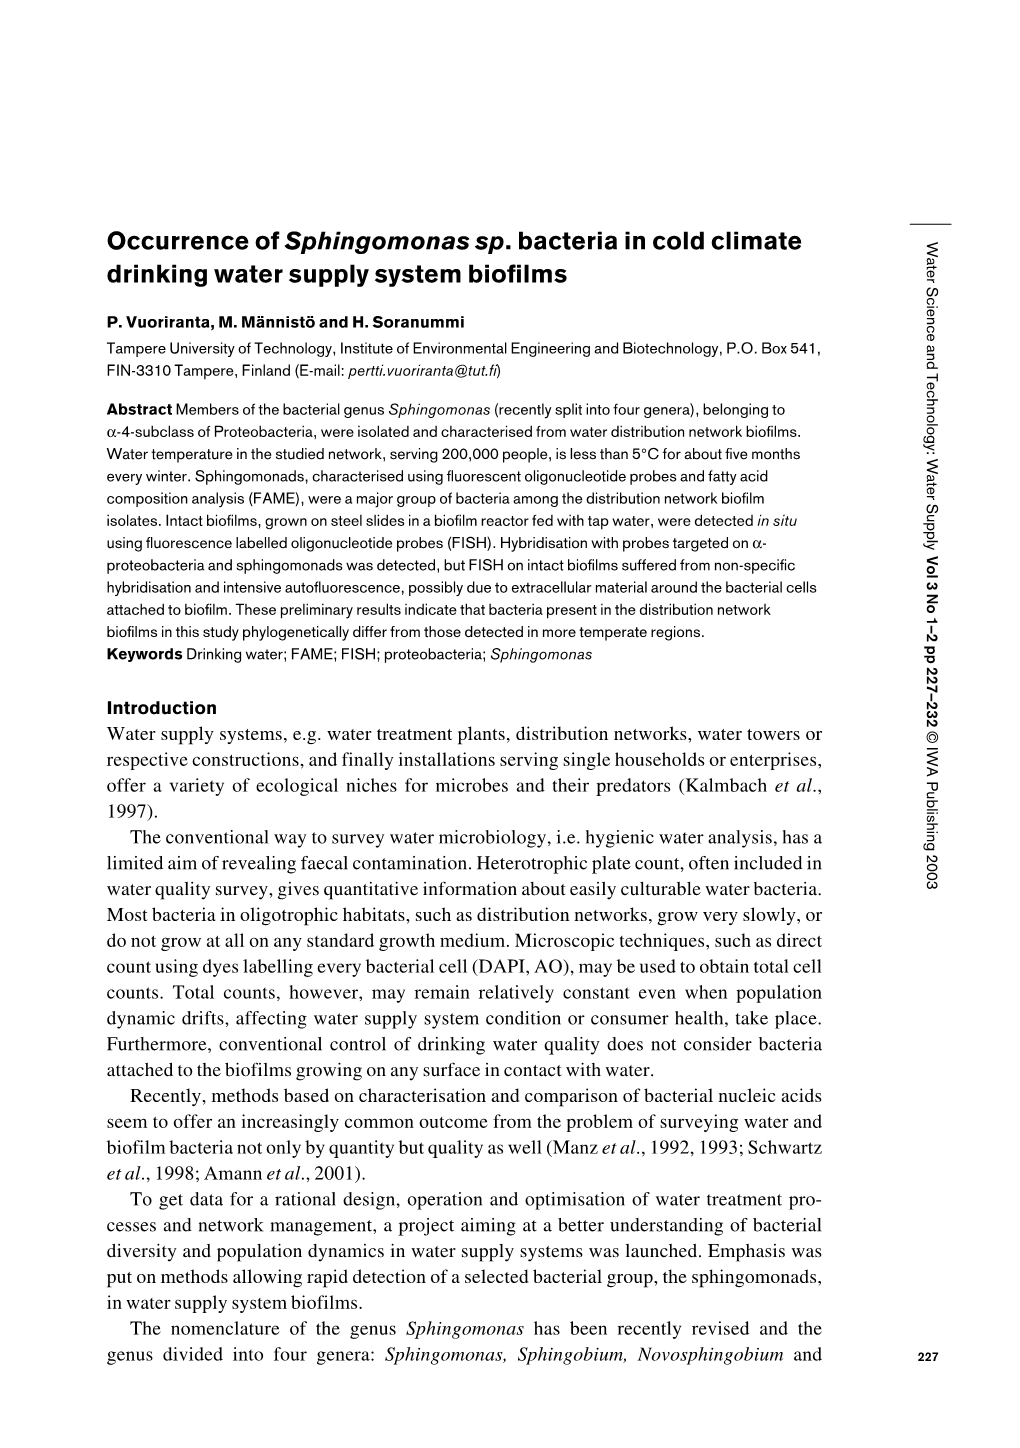 Occurrence of Sphingomonas Sp. Bacteria in Cold Climate Drinking